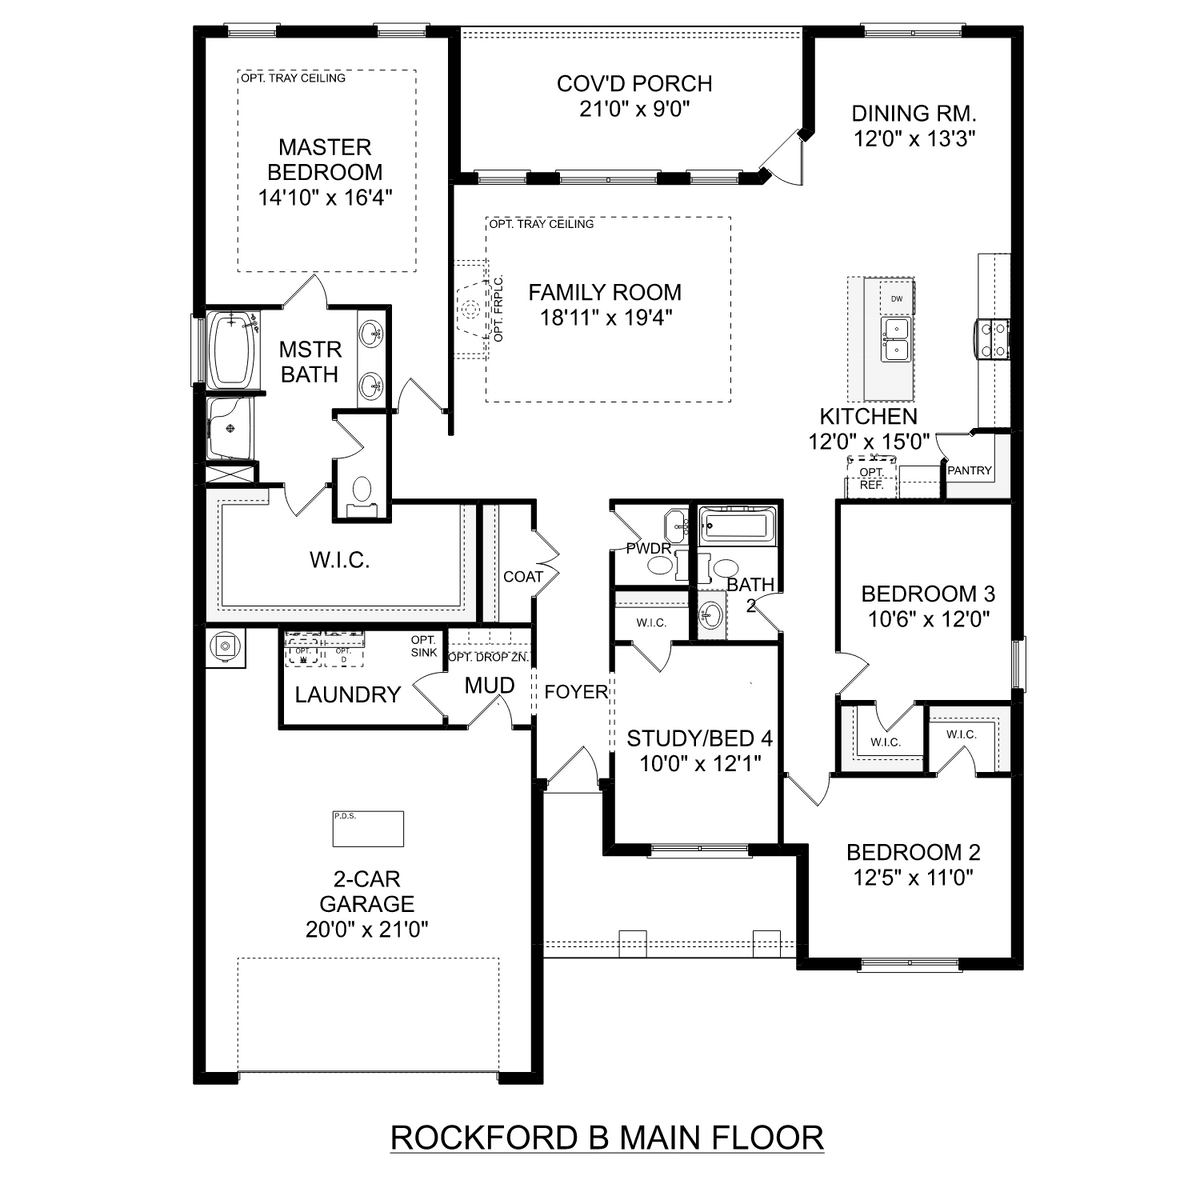 1 - The Rockford B floor plan layout for 3035 Henry Road in Davidson Homes' River Road Estates community.